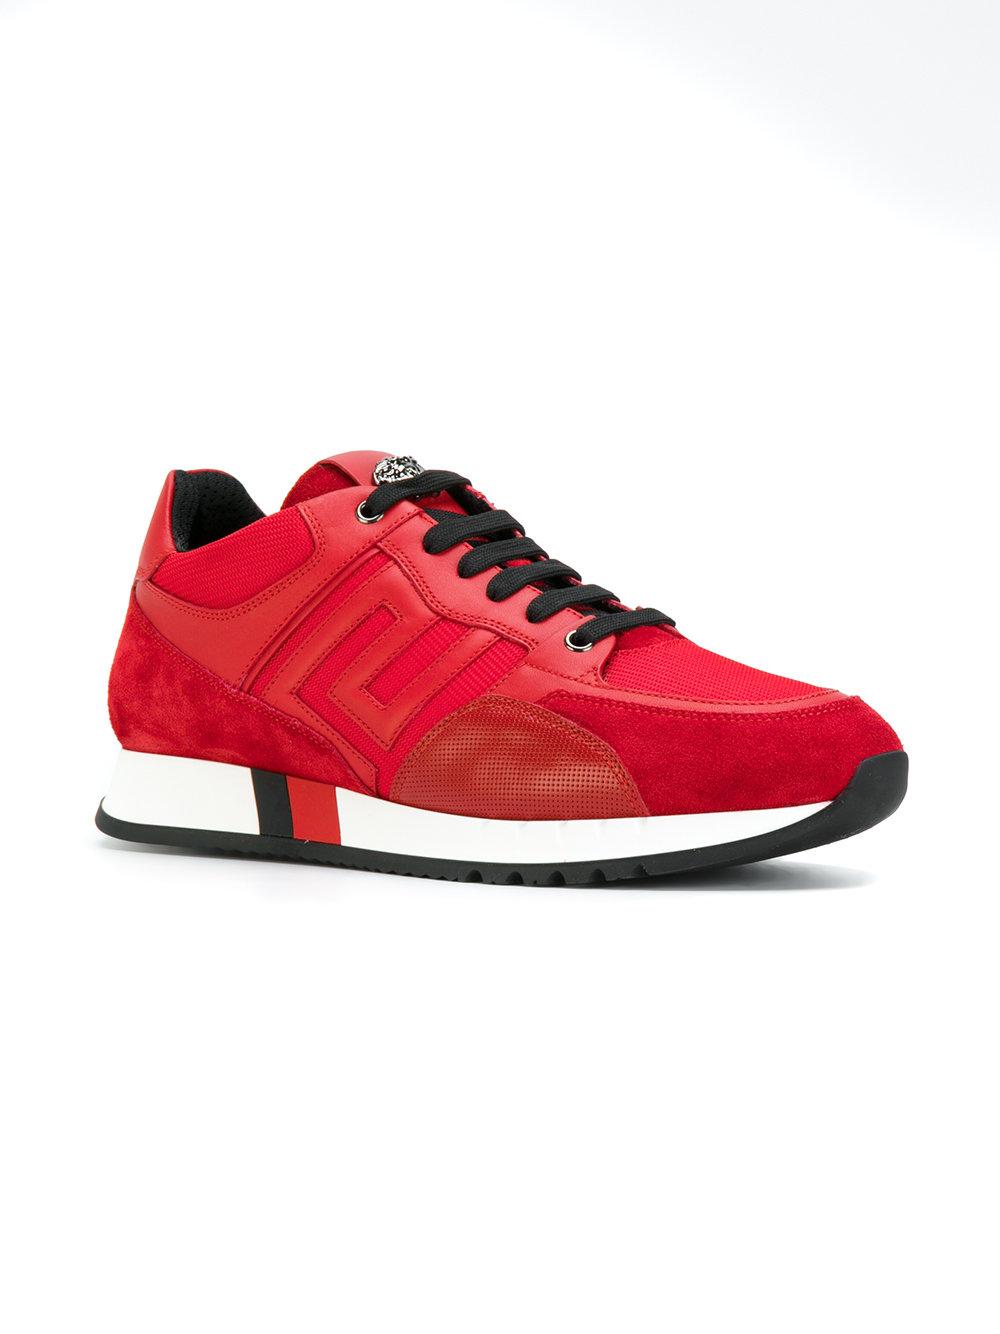 Versace Leather Greek Key Running Shoes in Red for Men - Lyst